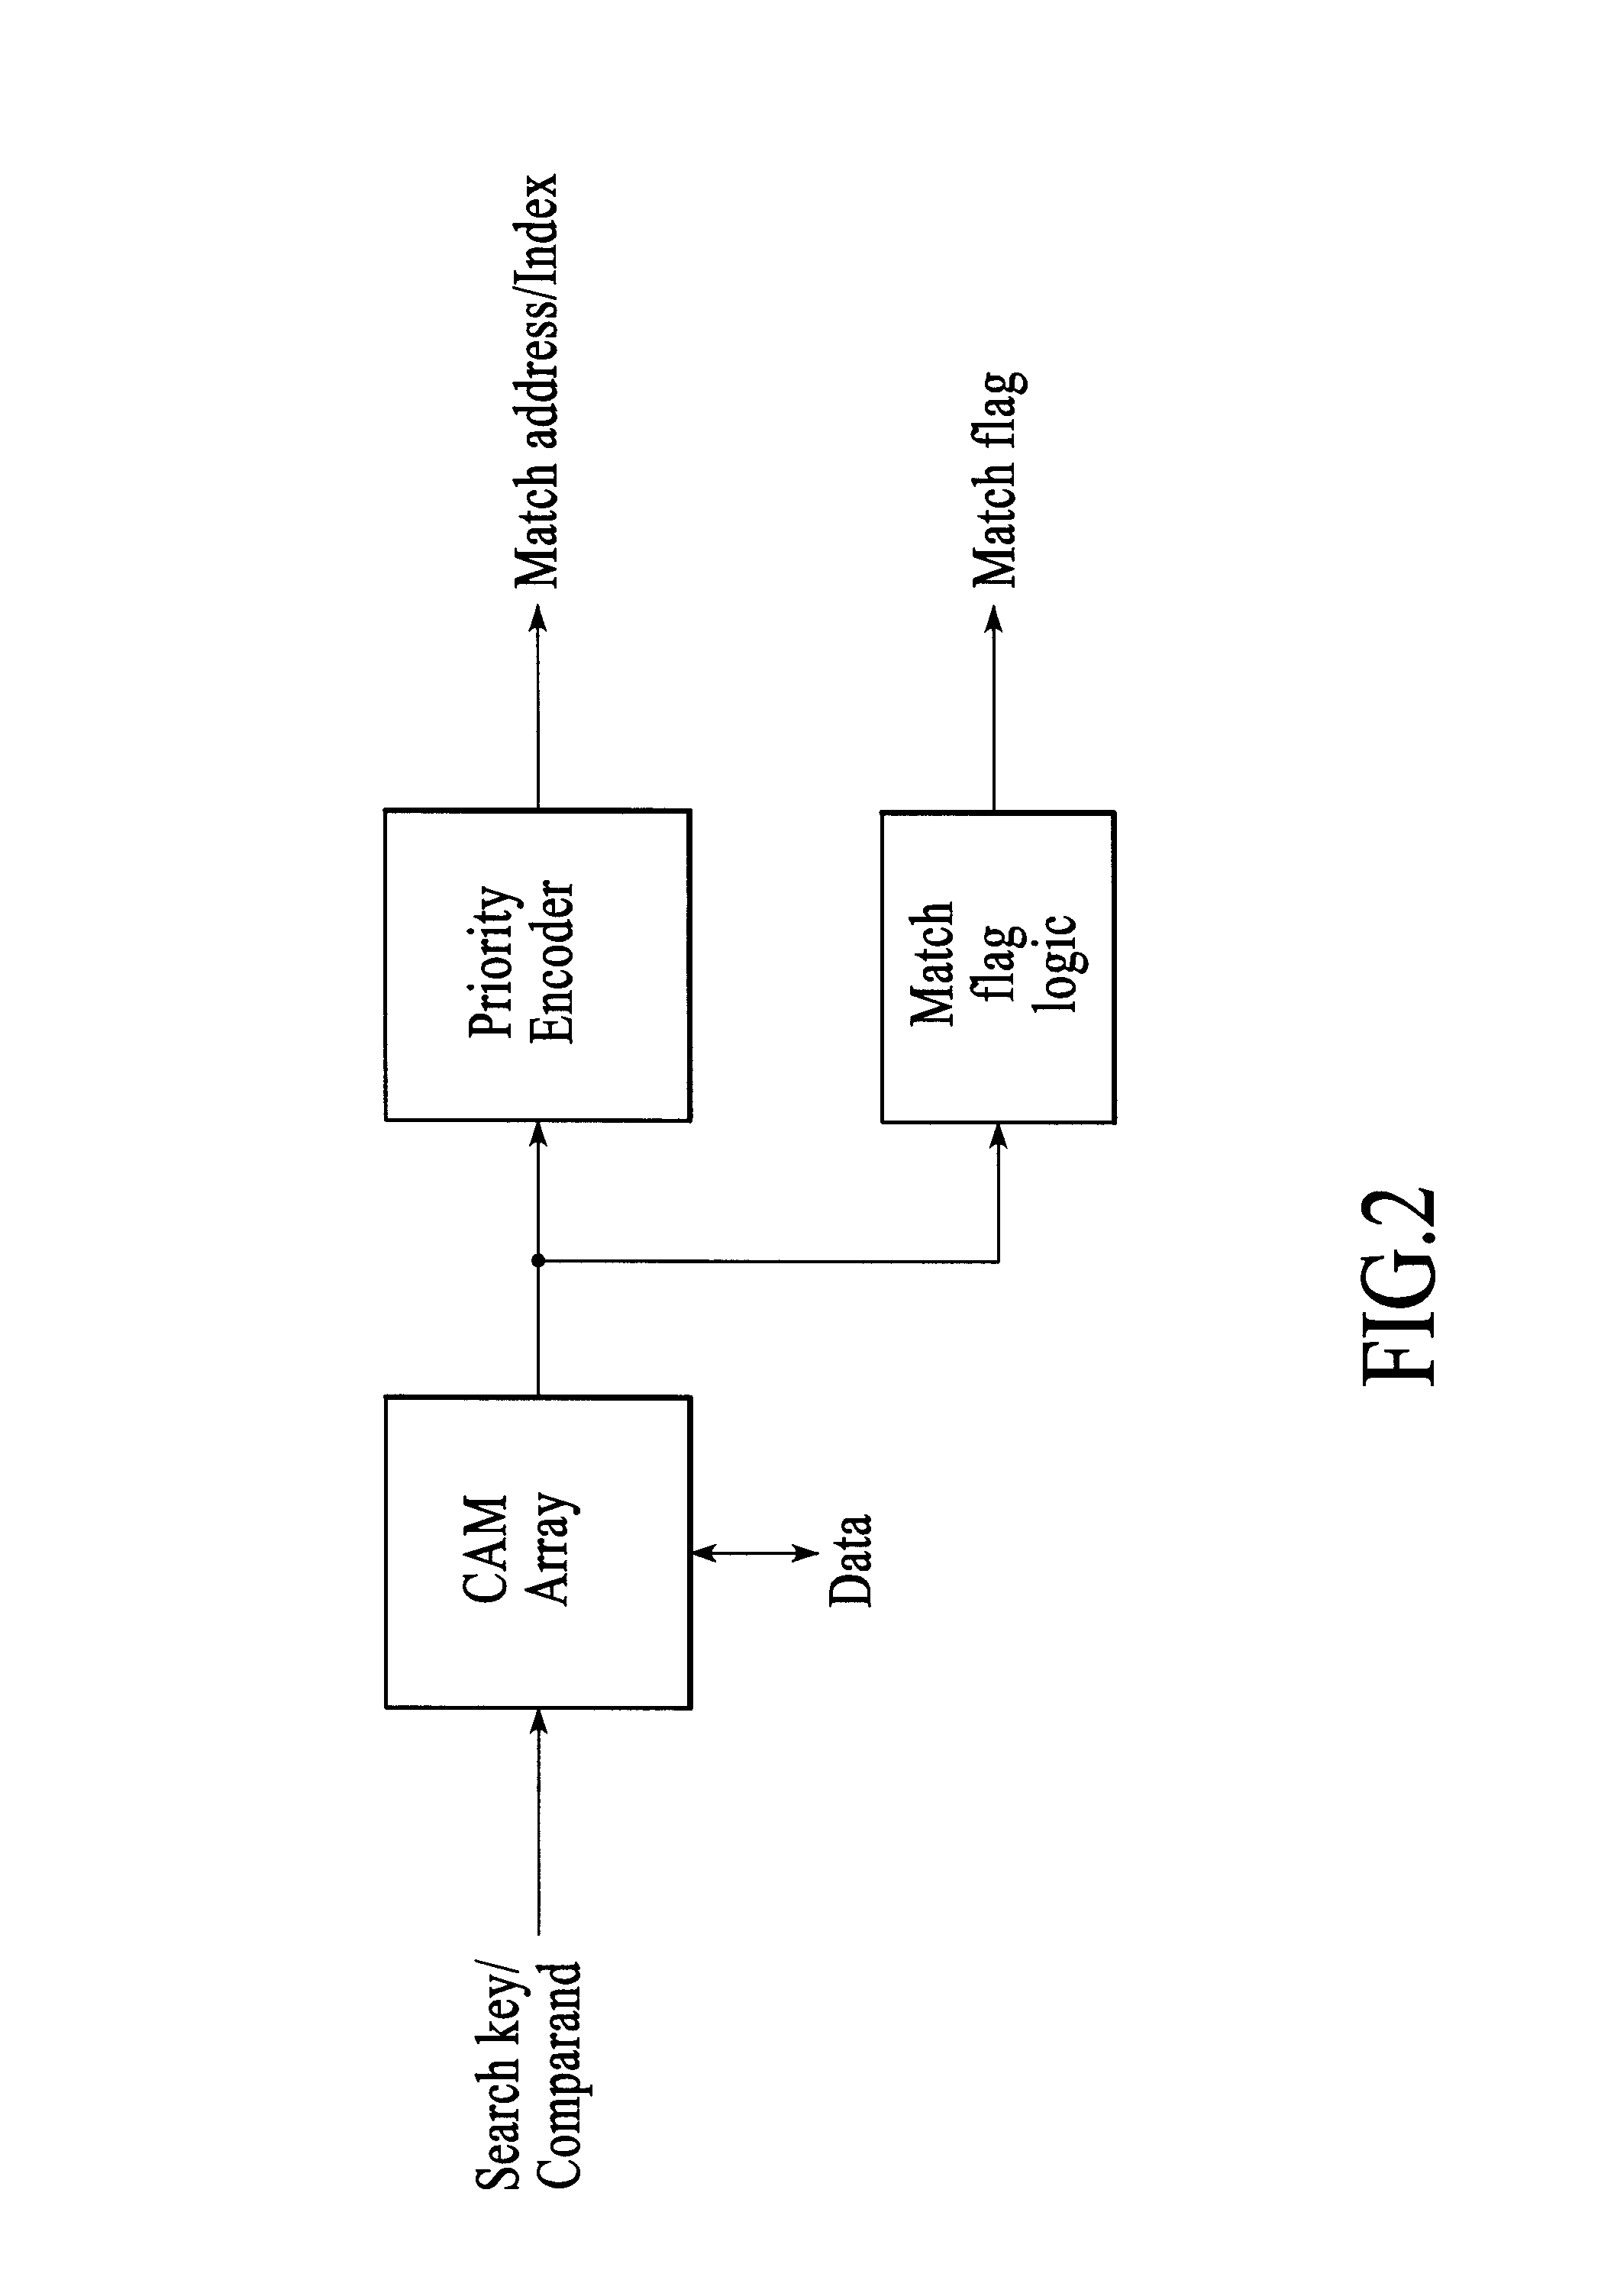 Input data selection for content addressable memory